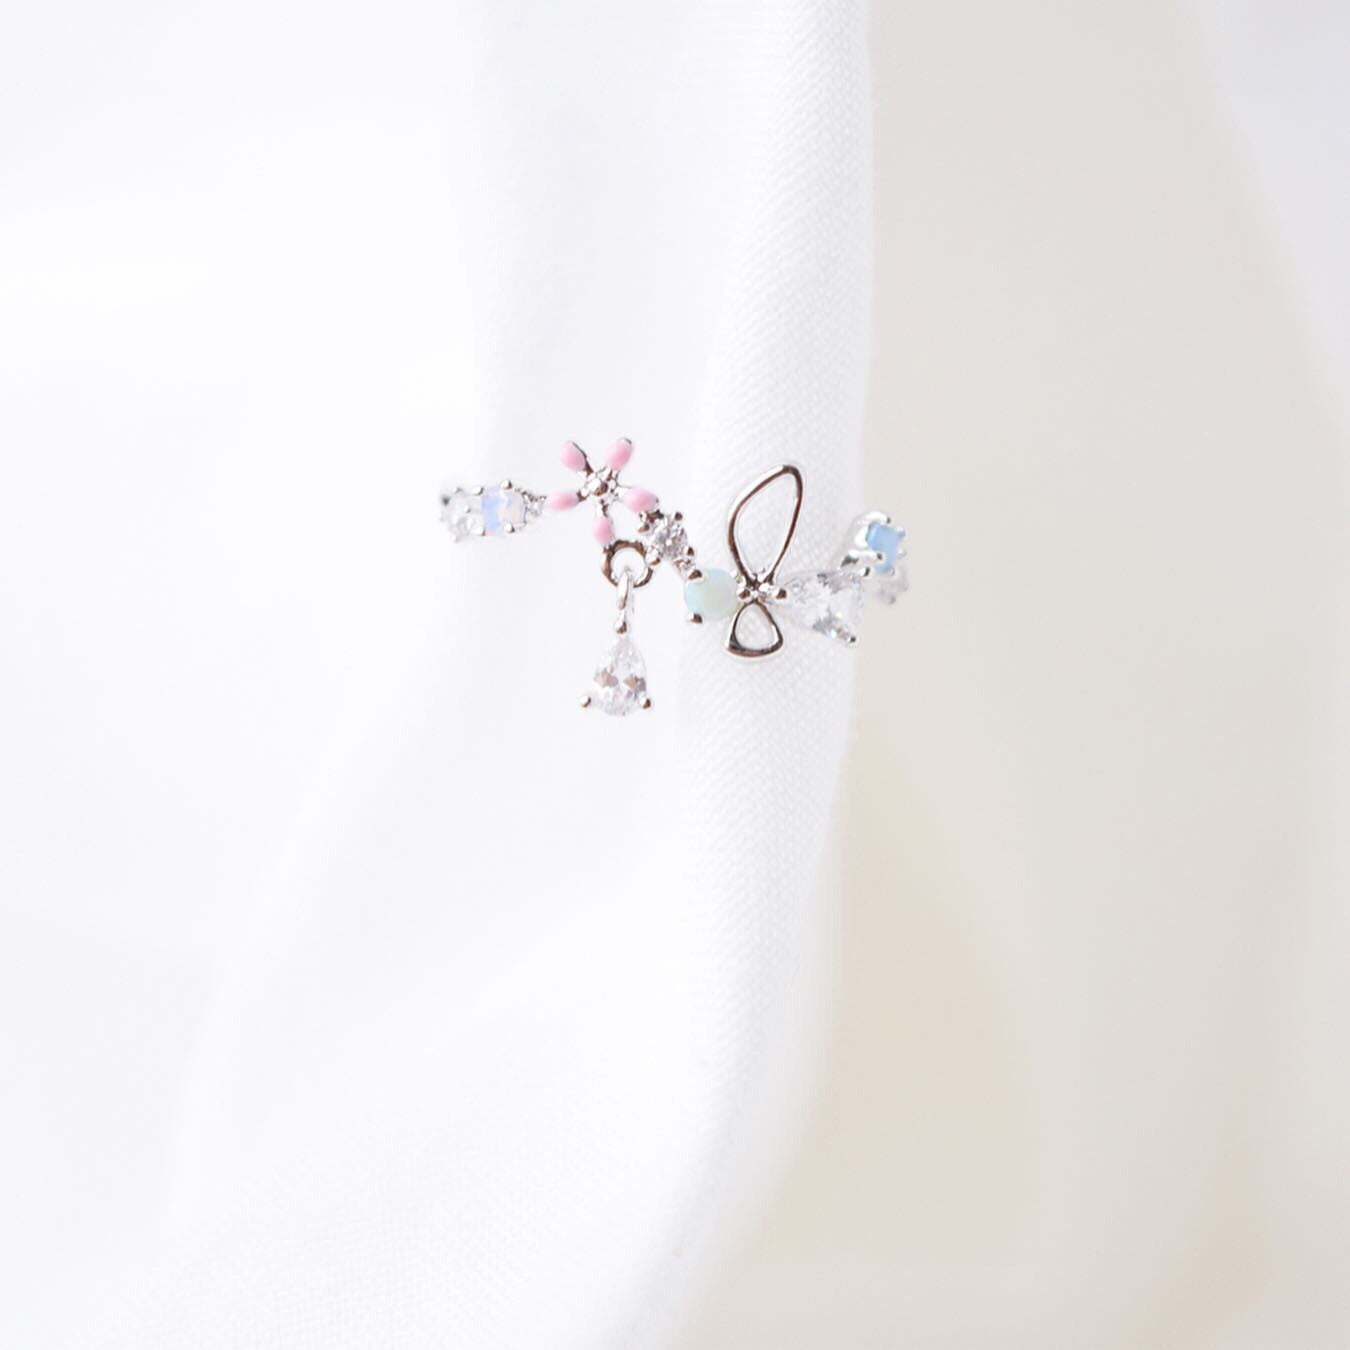 Rose Gold Ring Korea Made Earrings Cubic Zirconia Stone 925 Silver Daily Wear Stylish Cincin Adjustable Jewellery Perfect Surprise Gift For Your Loved One